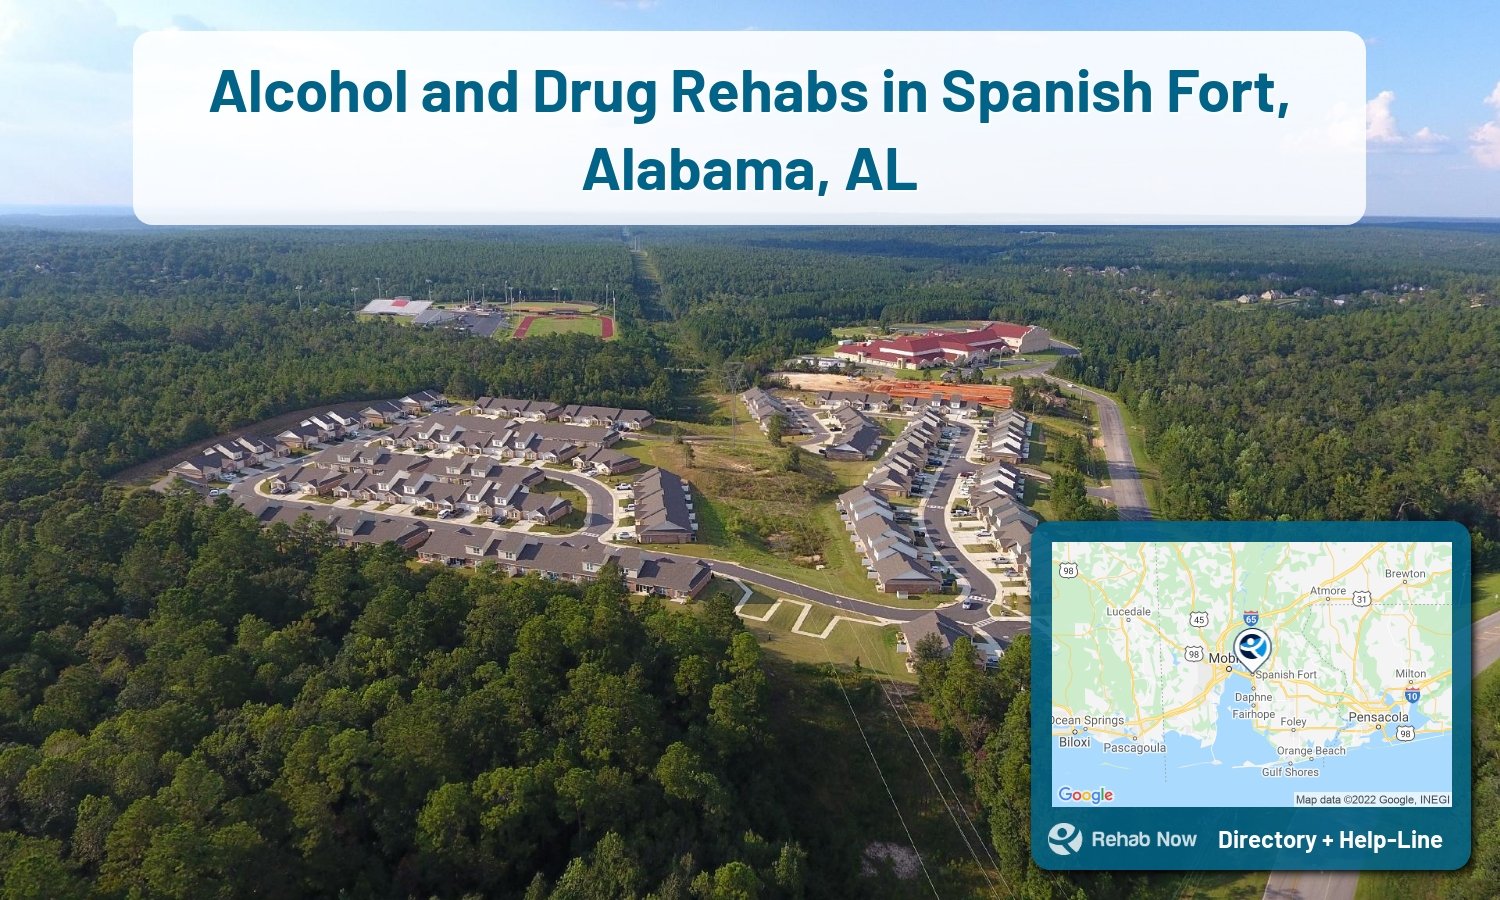 Spanish Fort, AL Treatment Centers. Find drug rehab in Spanish Fort, Alabama, or detox and treatment programs. Get the right help now!